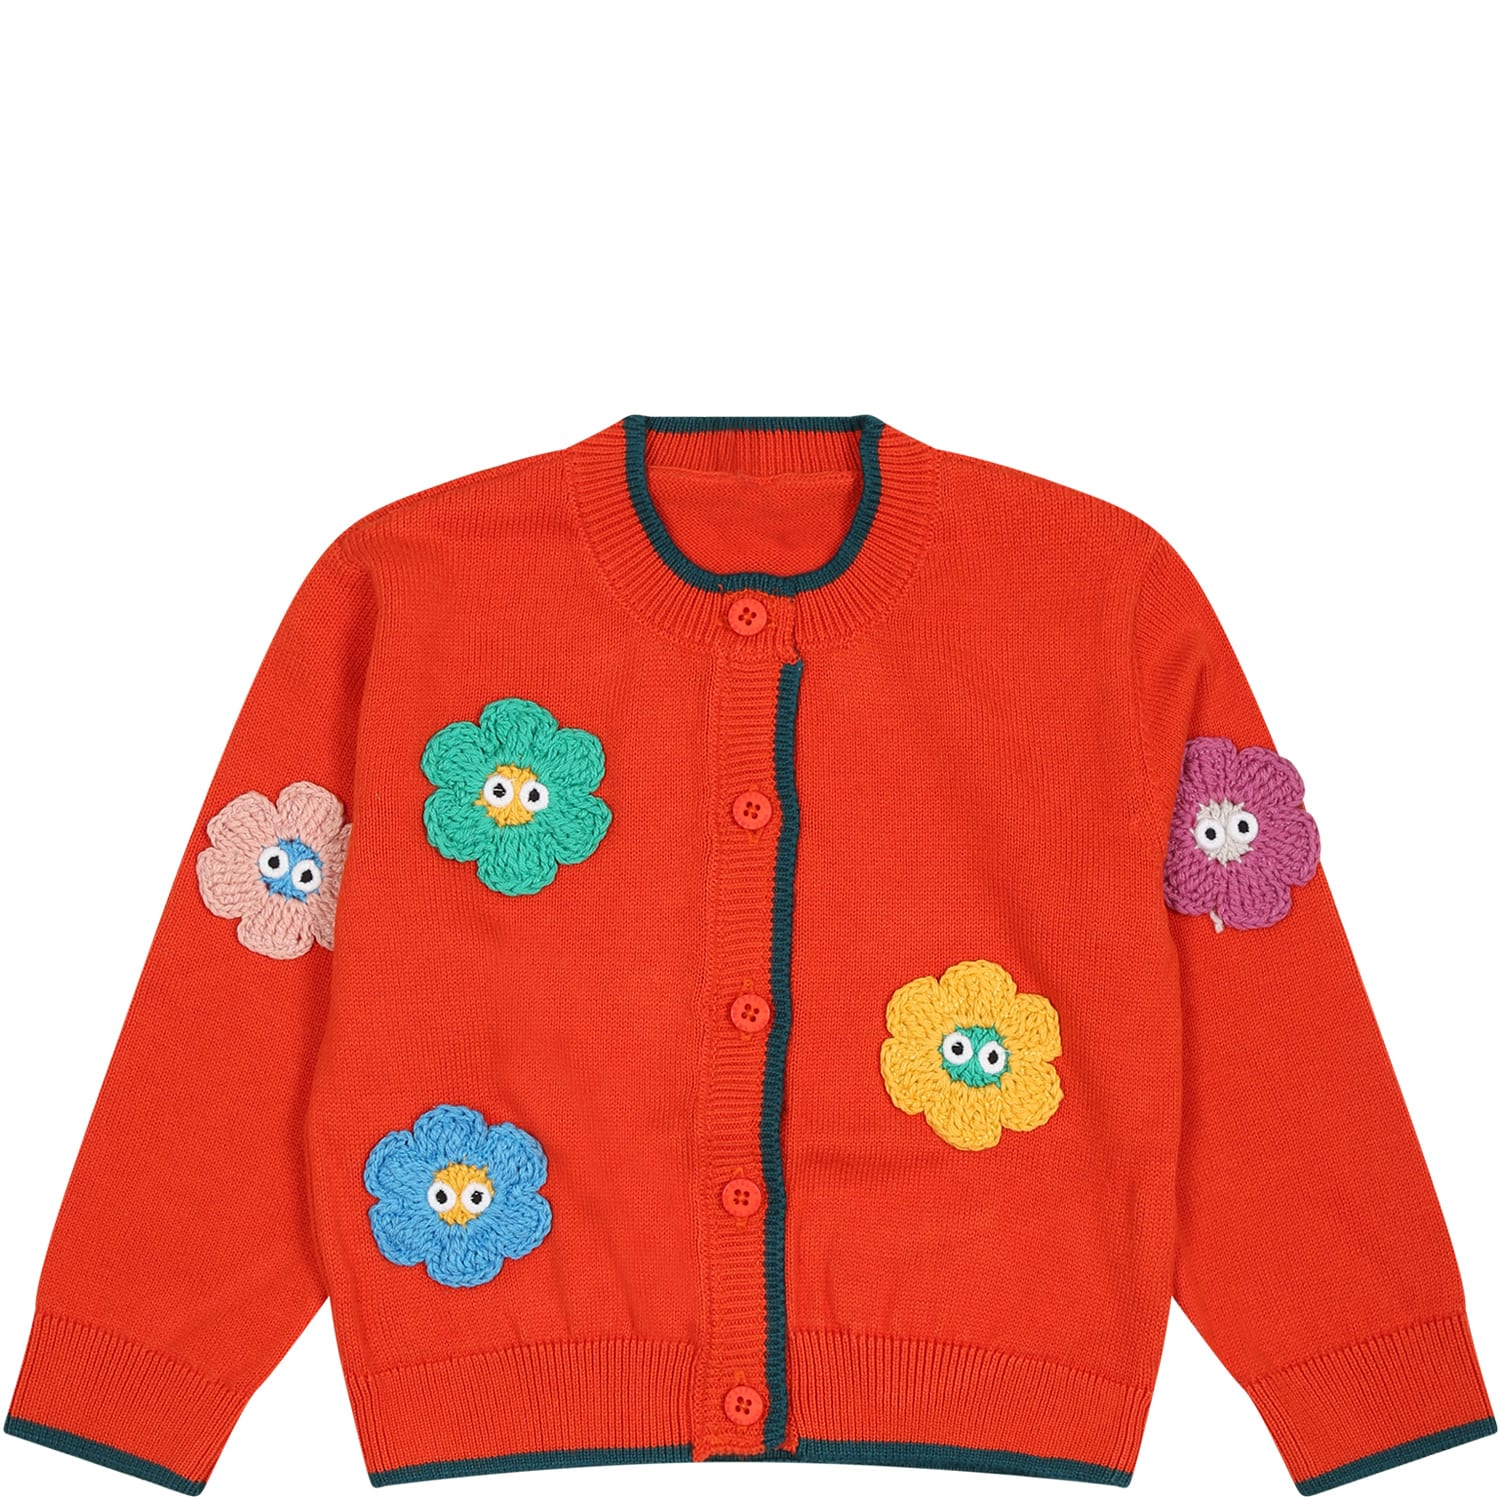 STELLA MCCARTNEY RED CARDIGAN FOR BABY GIRL WITH FLOWERS